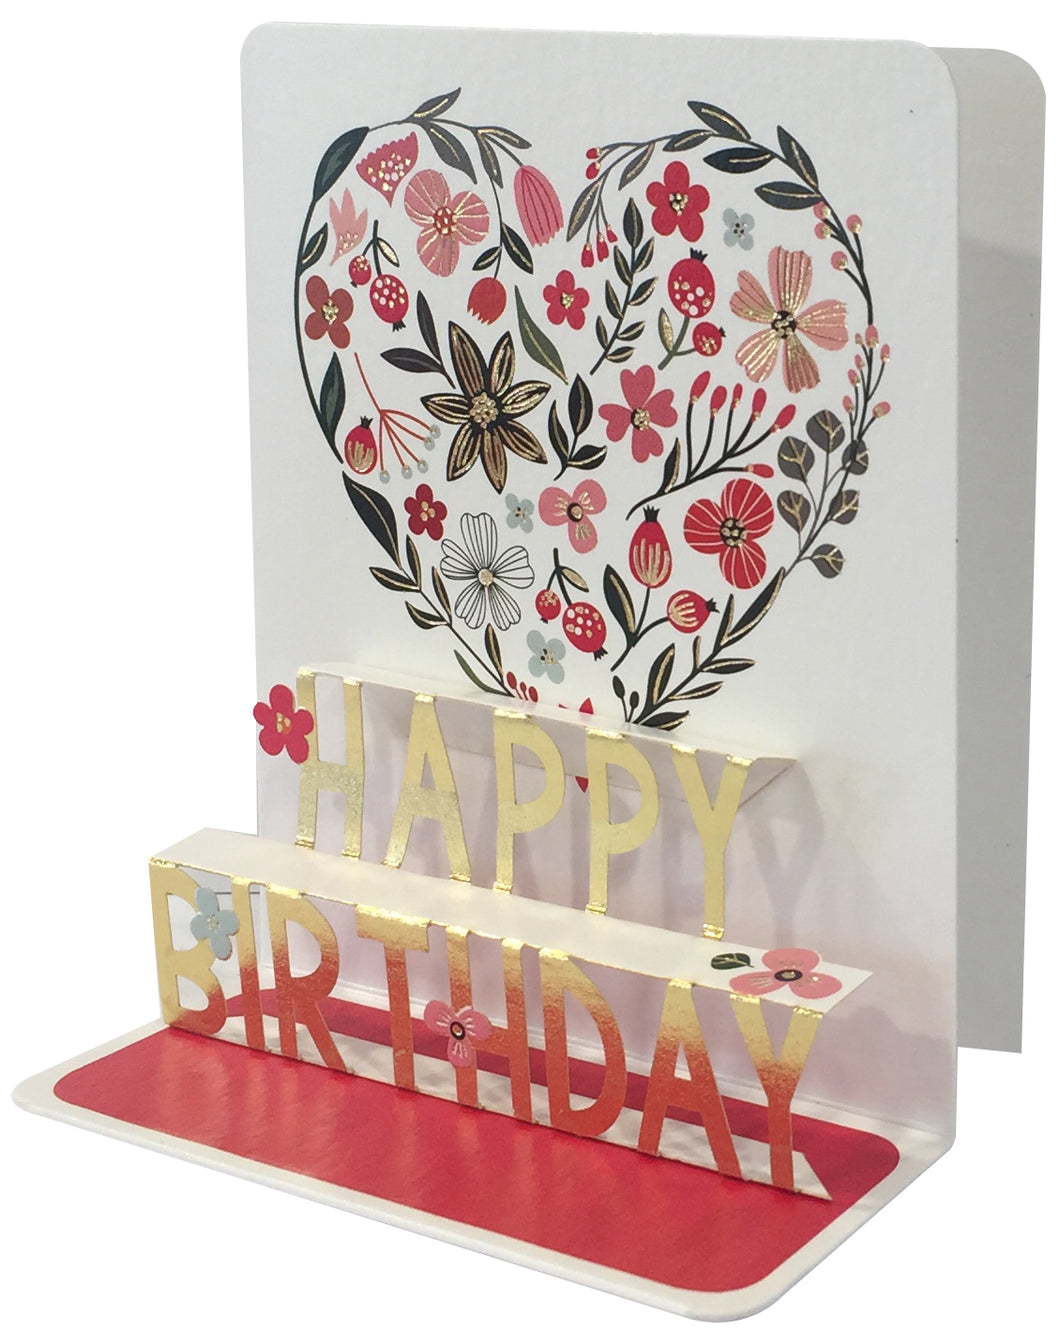 Bday Heart Birthday Pop-up Small 3D Card - Cardmore